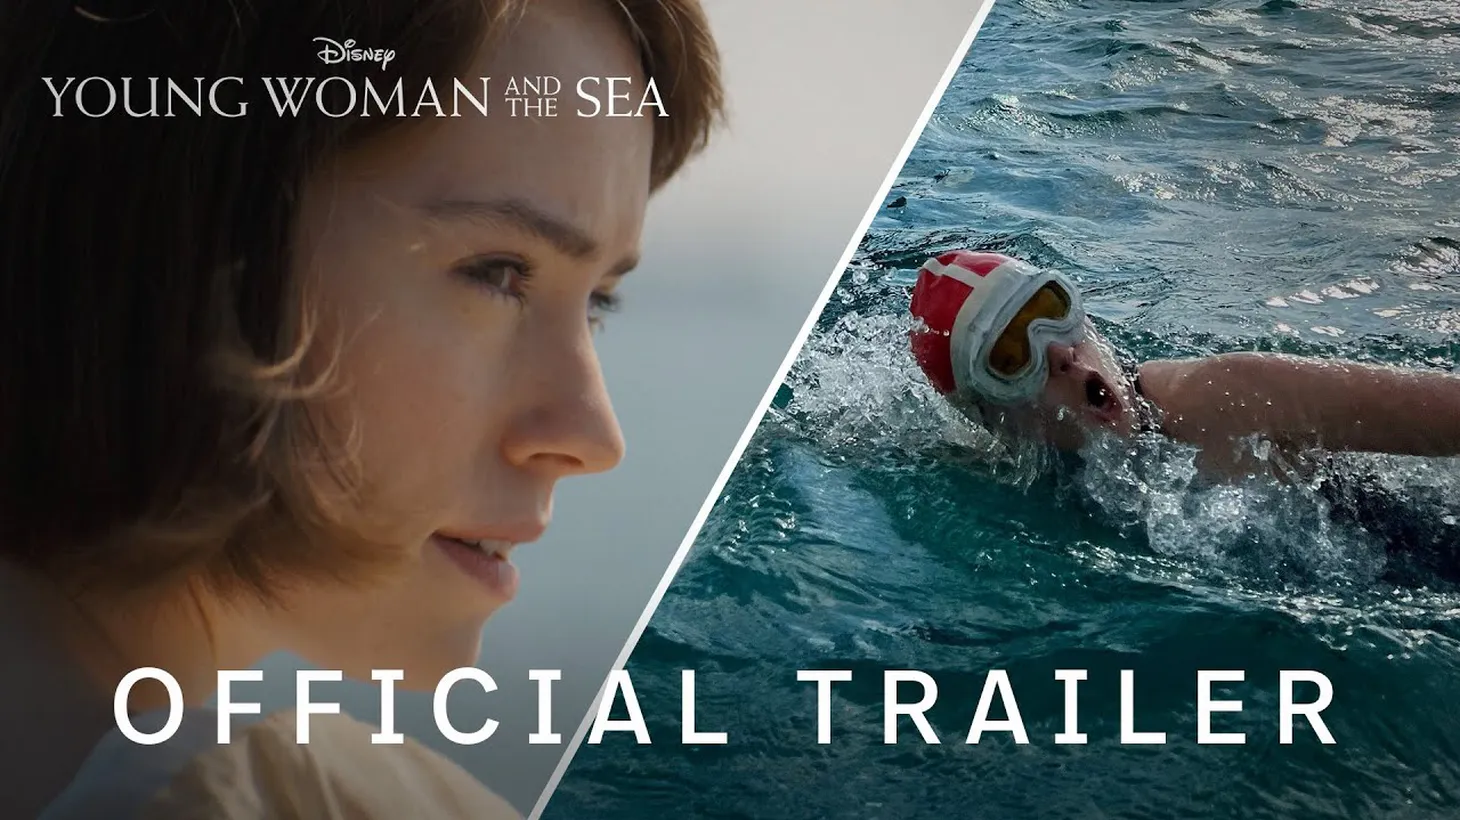 “Young Woman and the Sea” stars Daisy Ridley as Trudy Ederle, who became the first woman to swim across the English Channel in 1926.